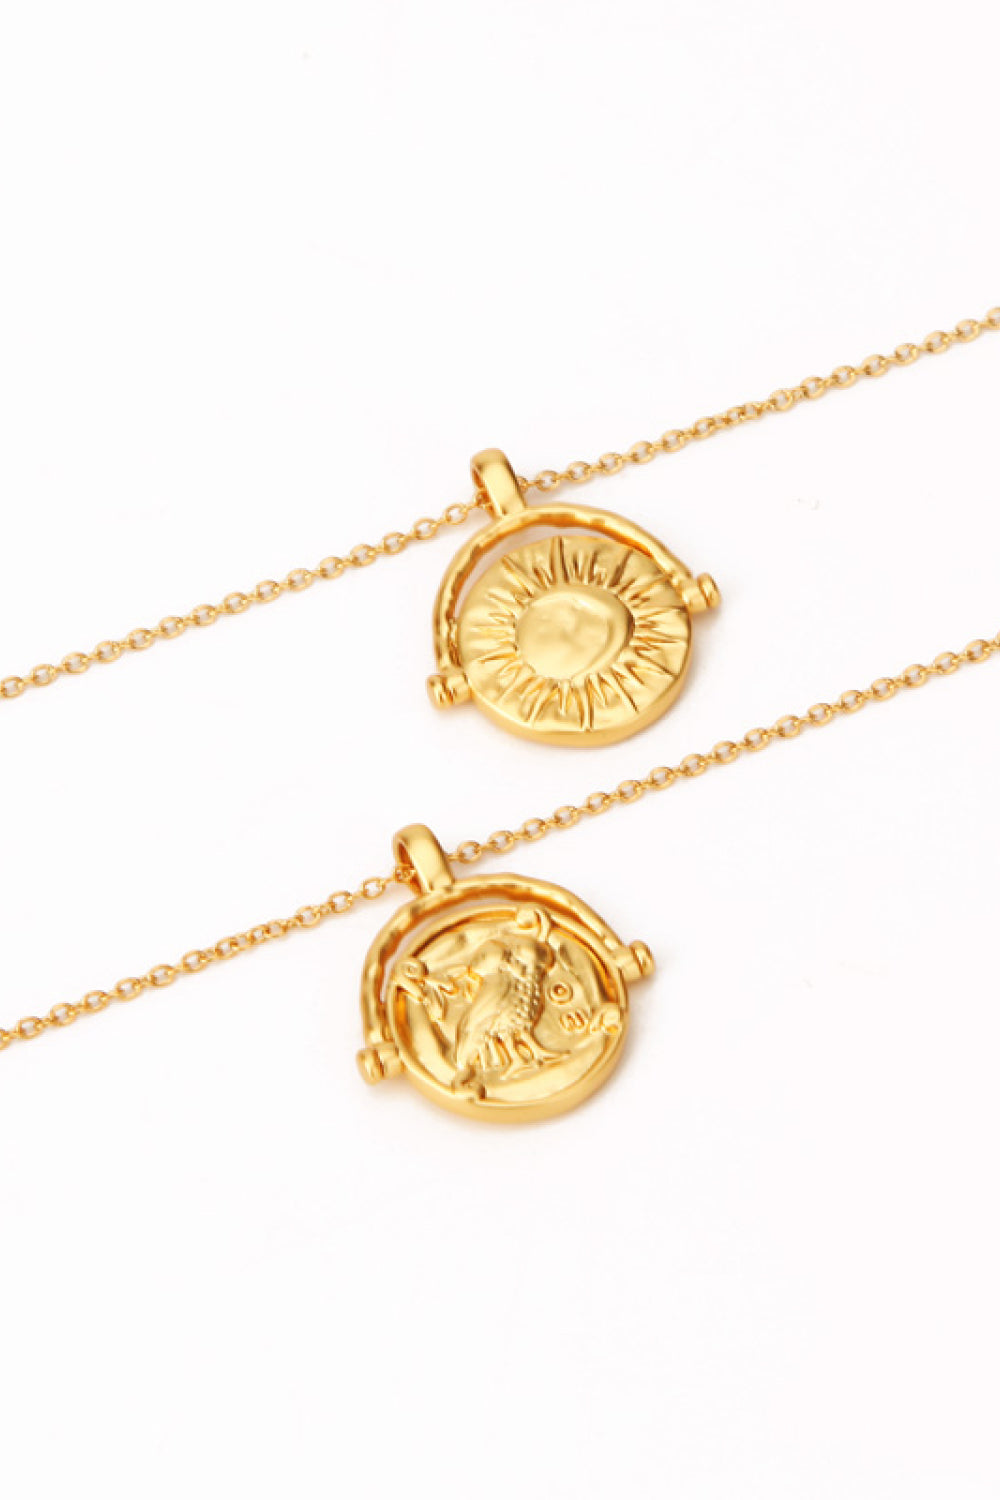 18K Gold-Plated Brass Double Sided Wear Necklace - Necklaces - FITGGINS